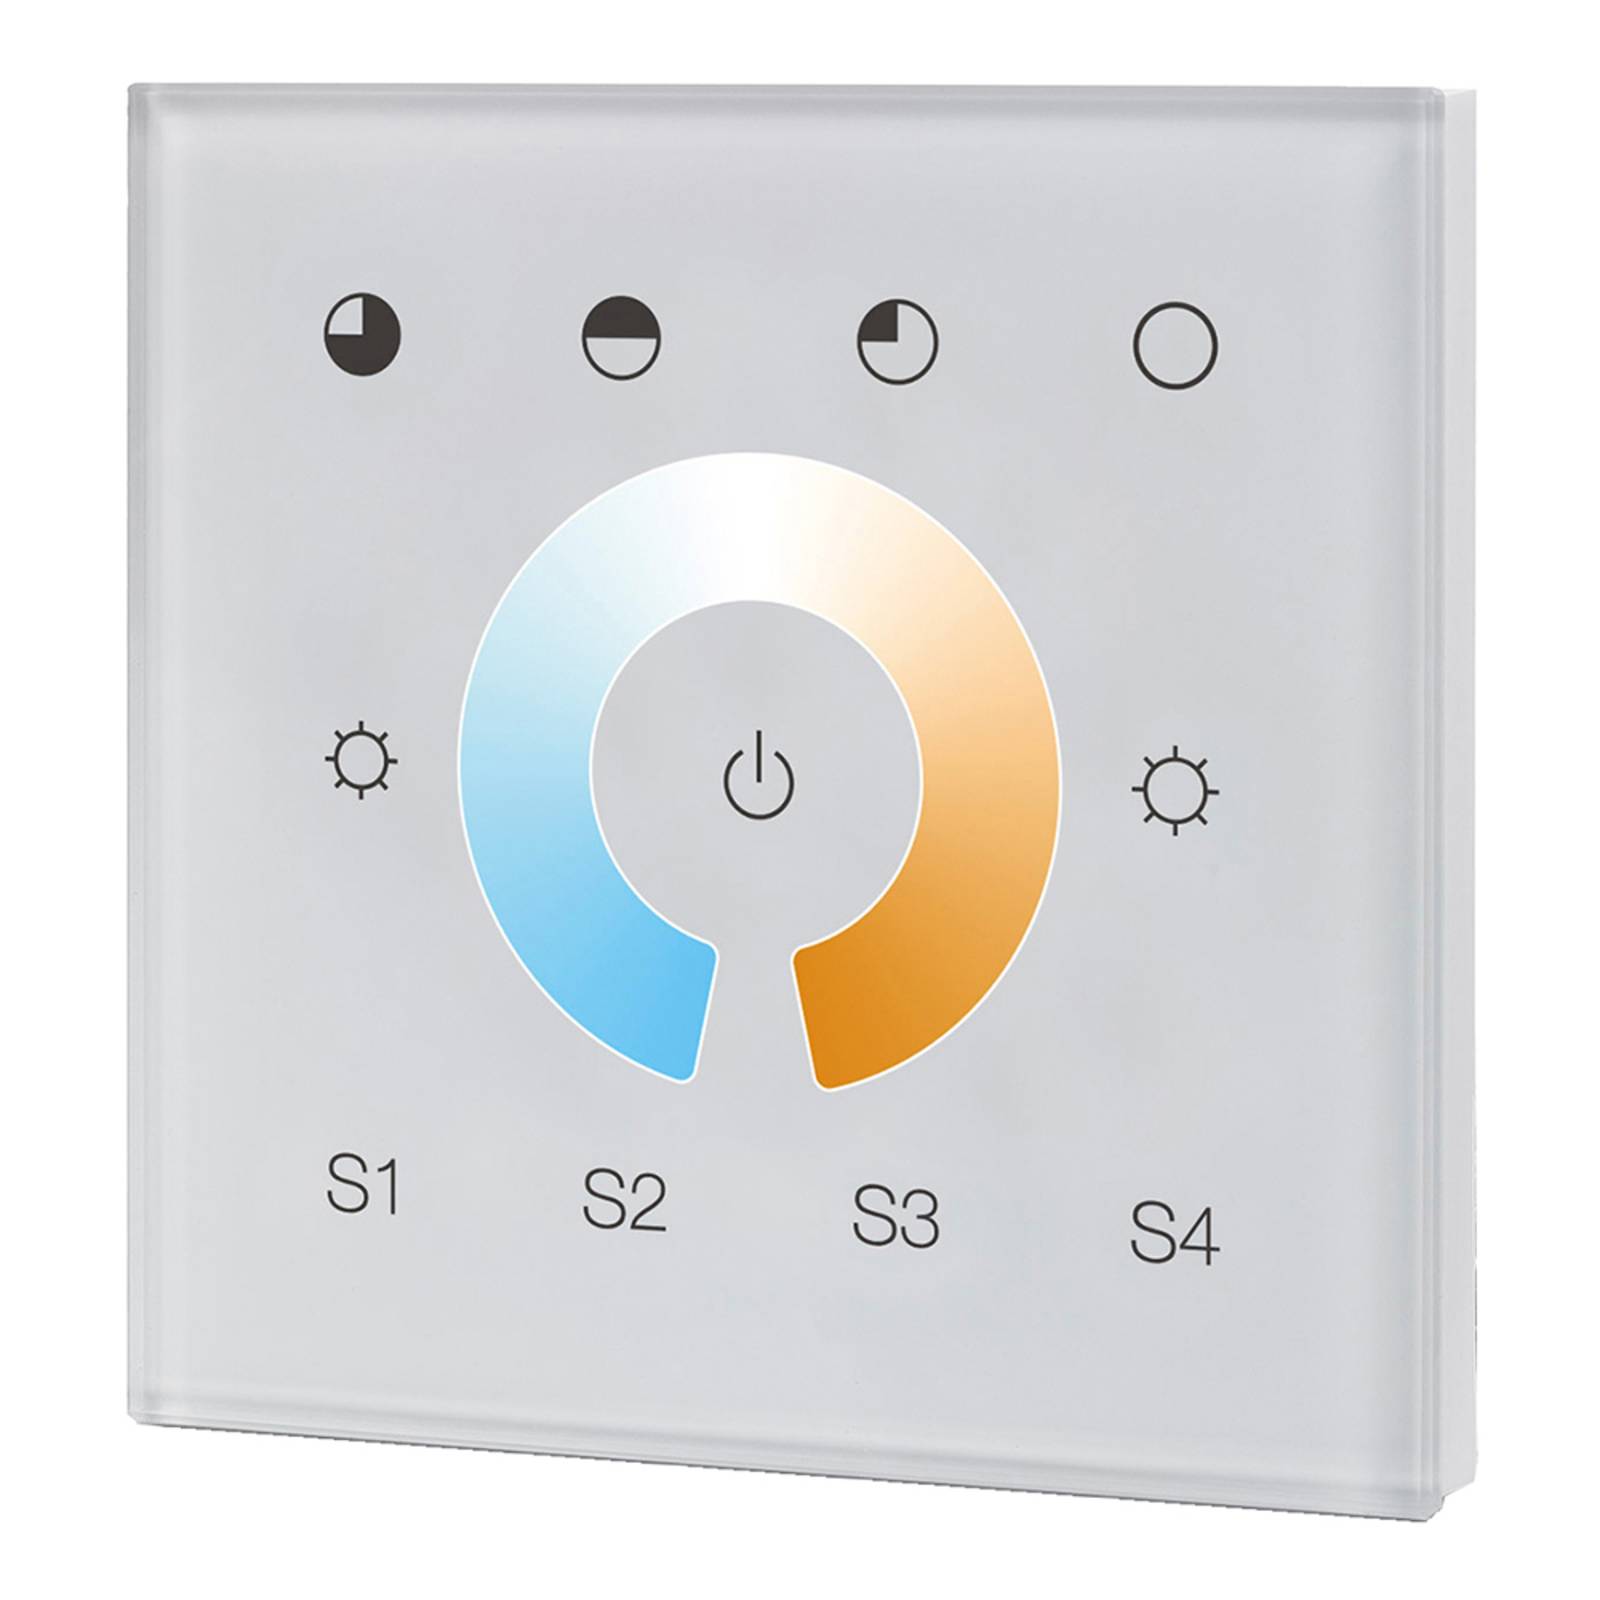 The Light Group SLC Wanddimmer/Tunable White DALI DT8